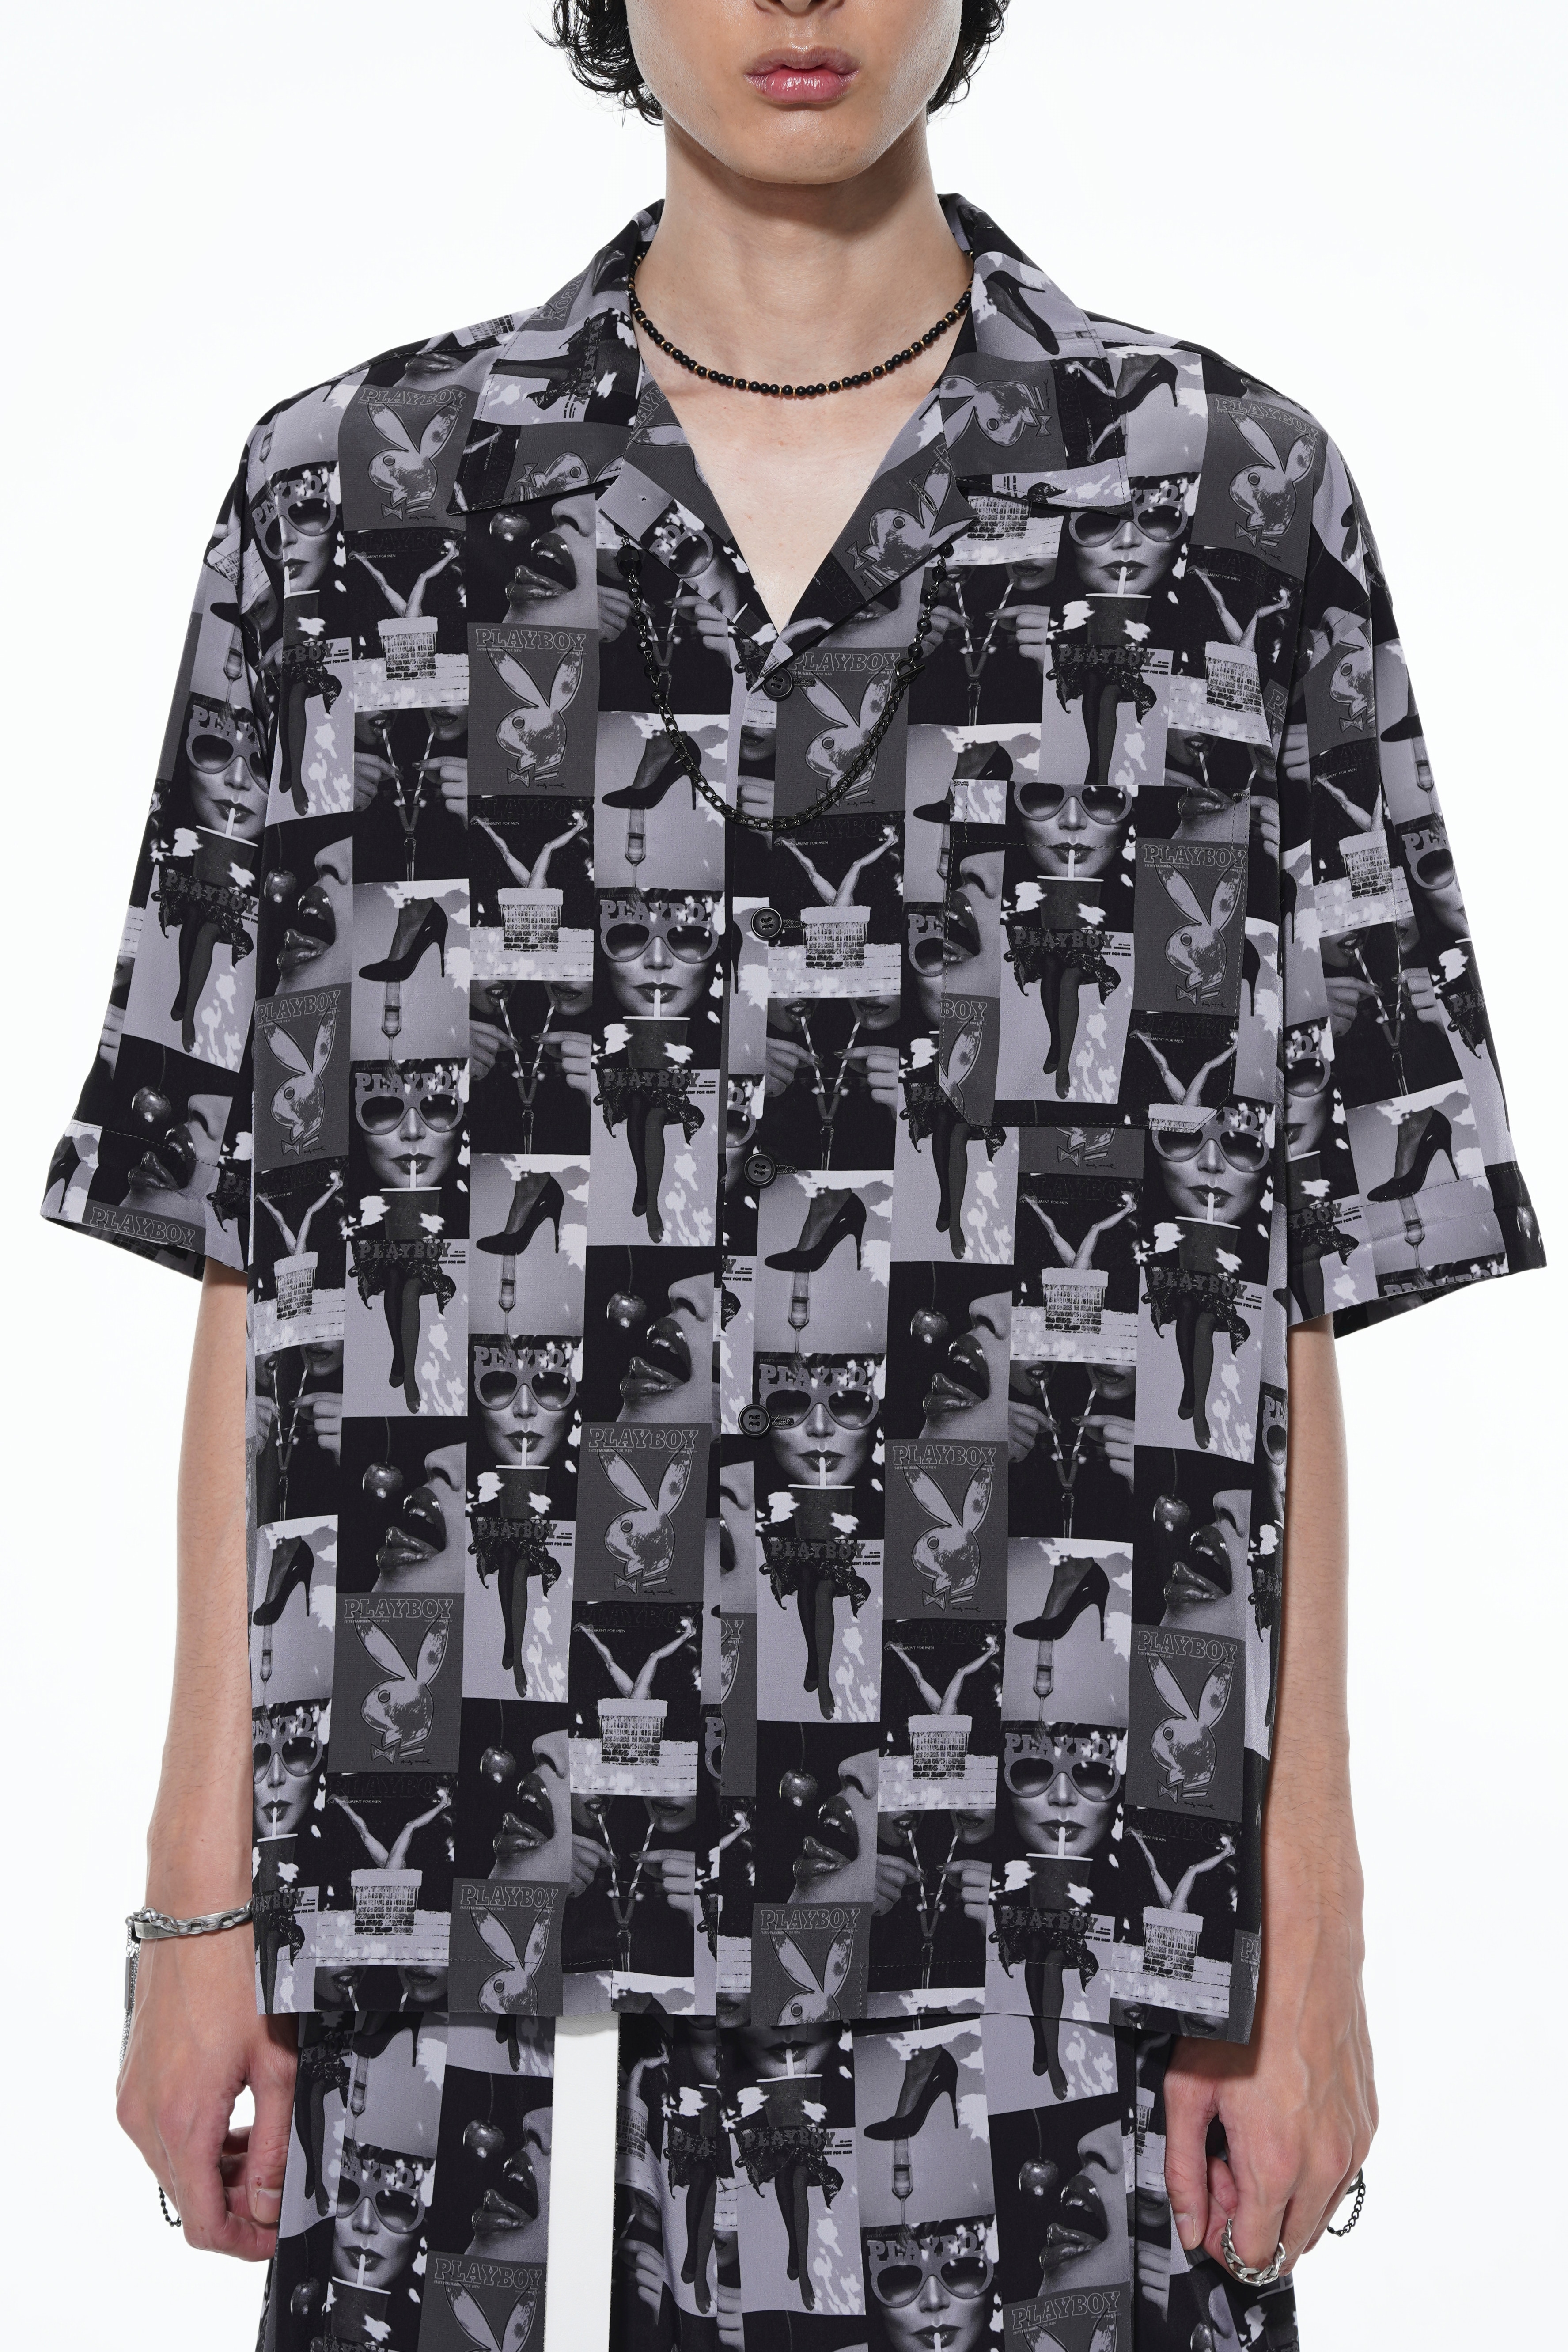 PLAYBOY×S'YTE COVER BEST COLLAGE BIG SHORT SLEEVE SHIRT(M 